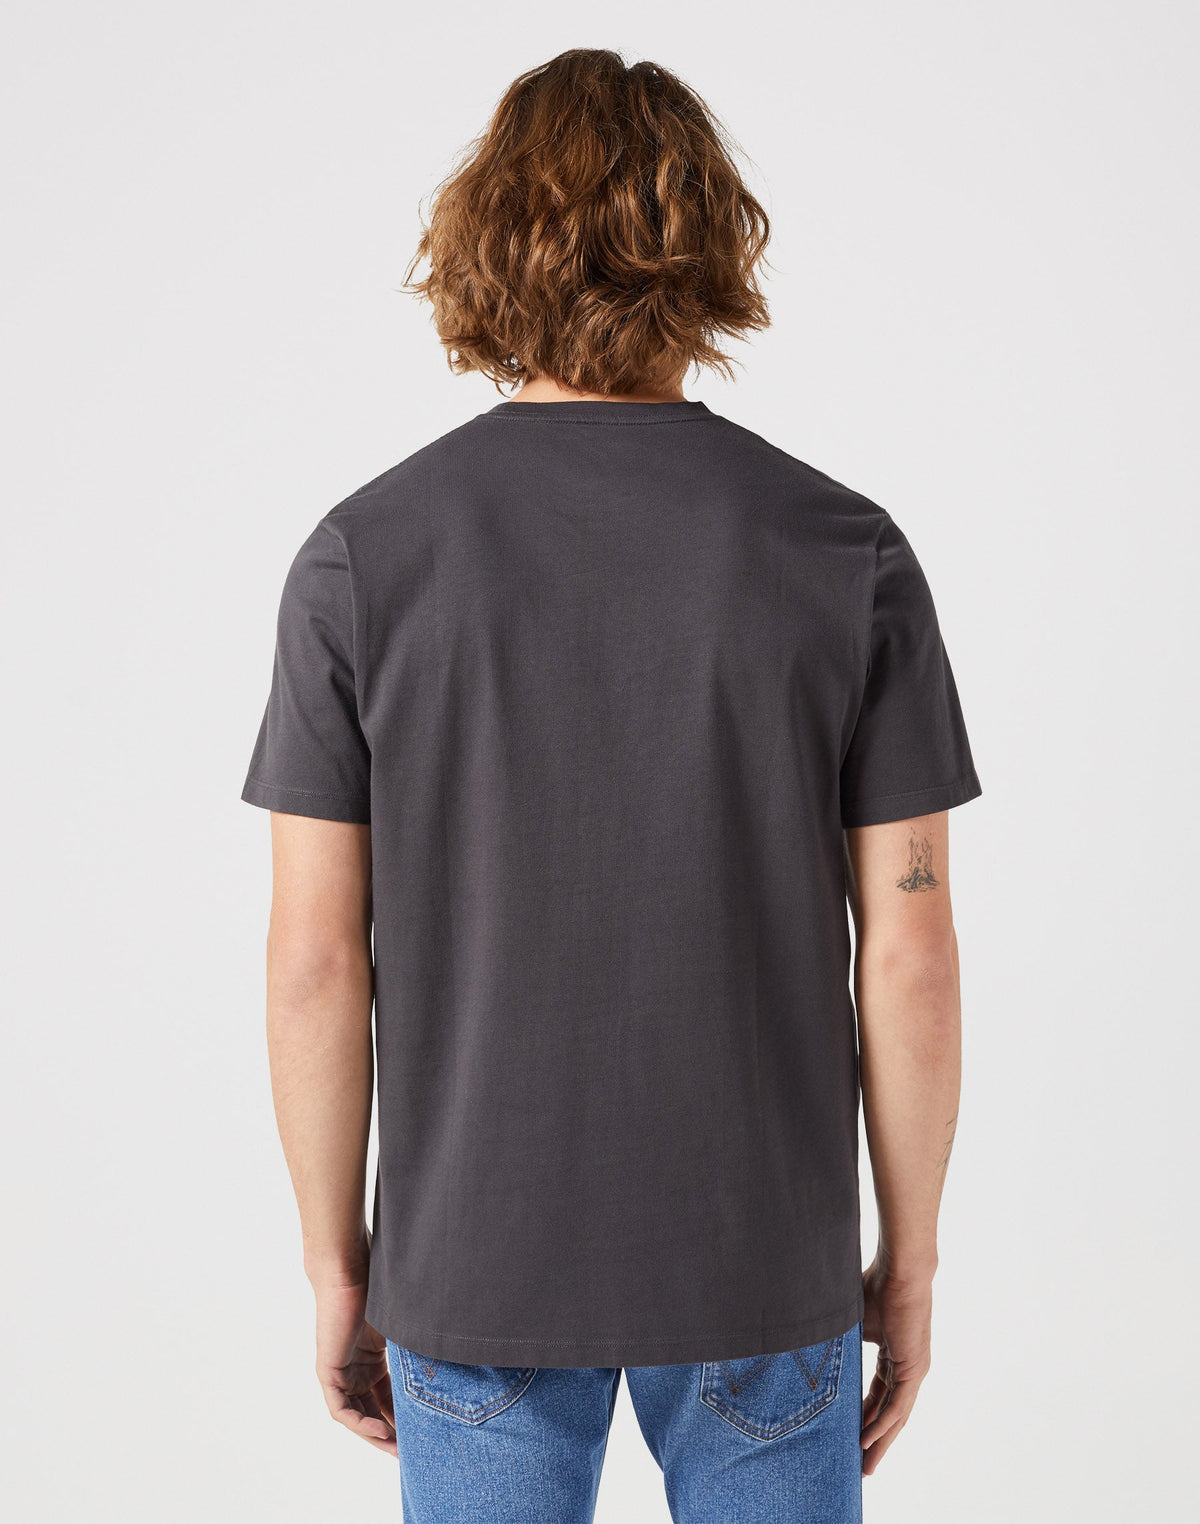 Sign Off Tee in Faded Black